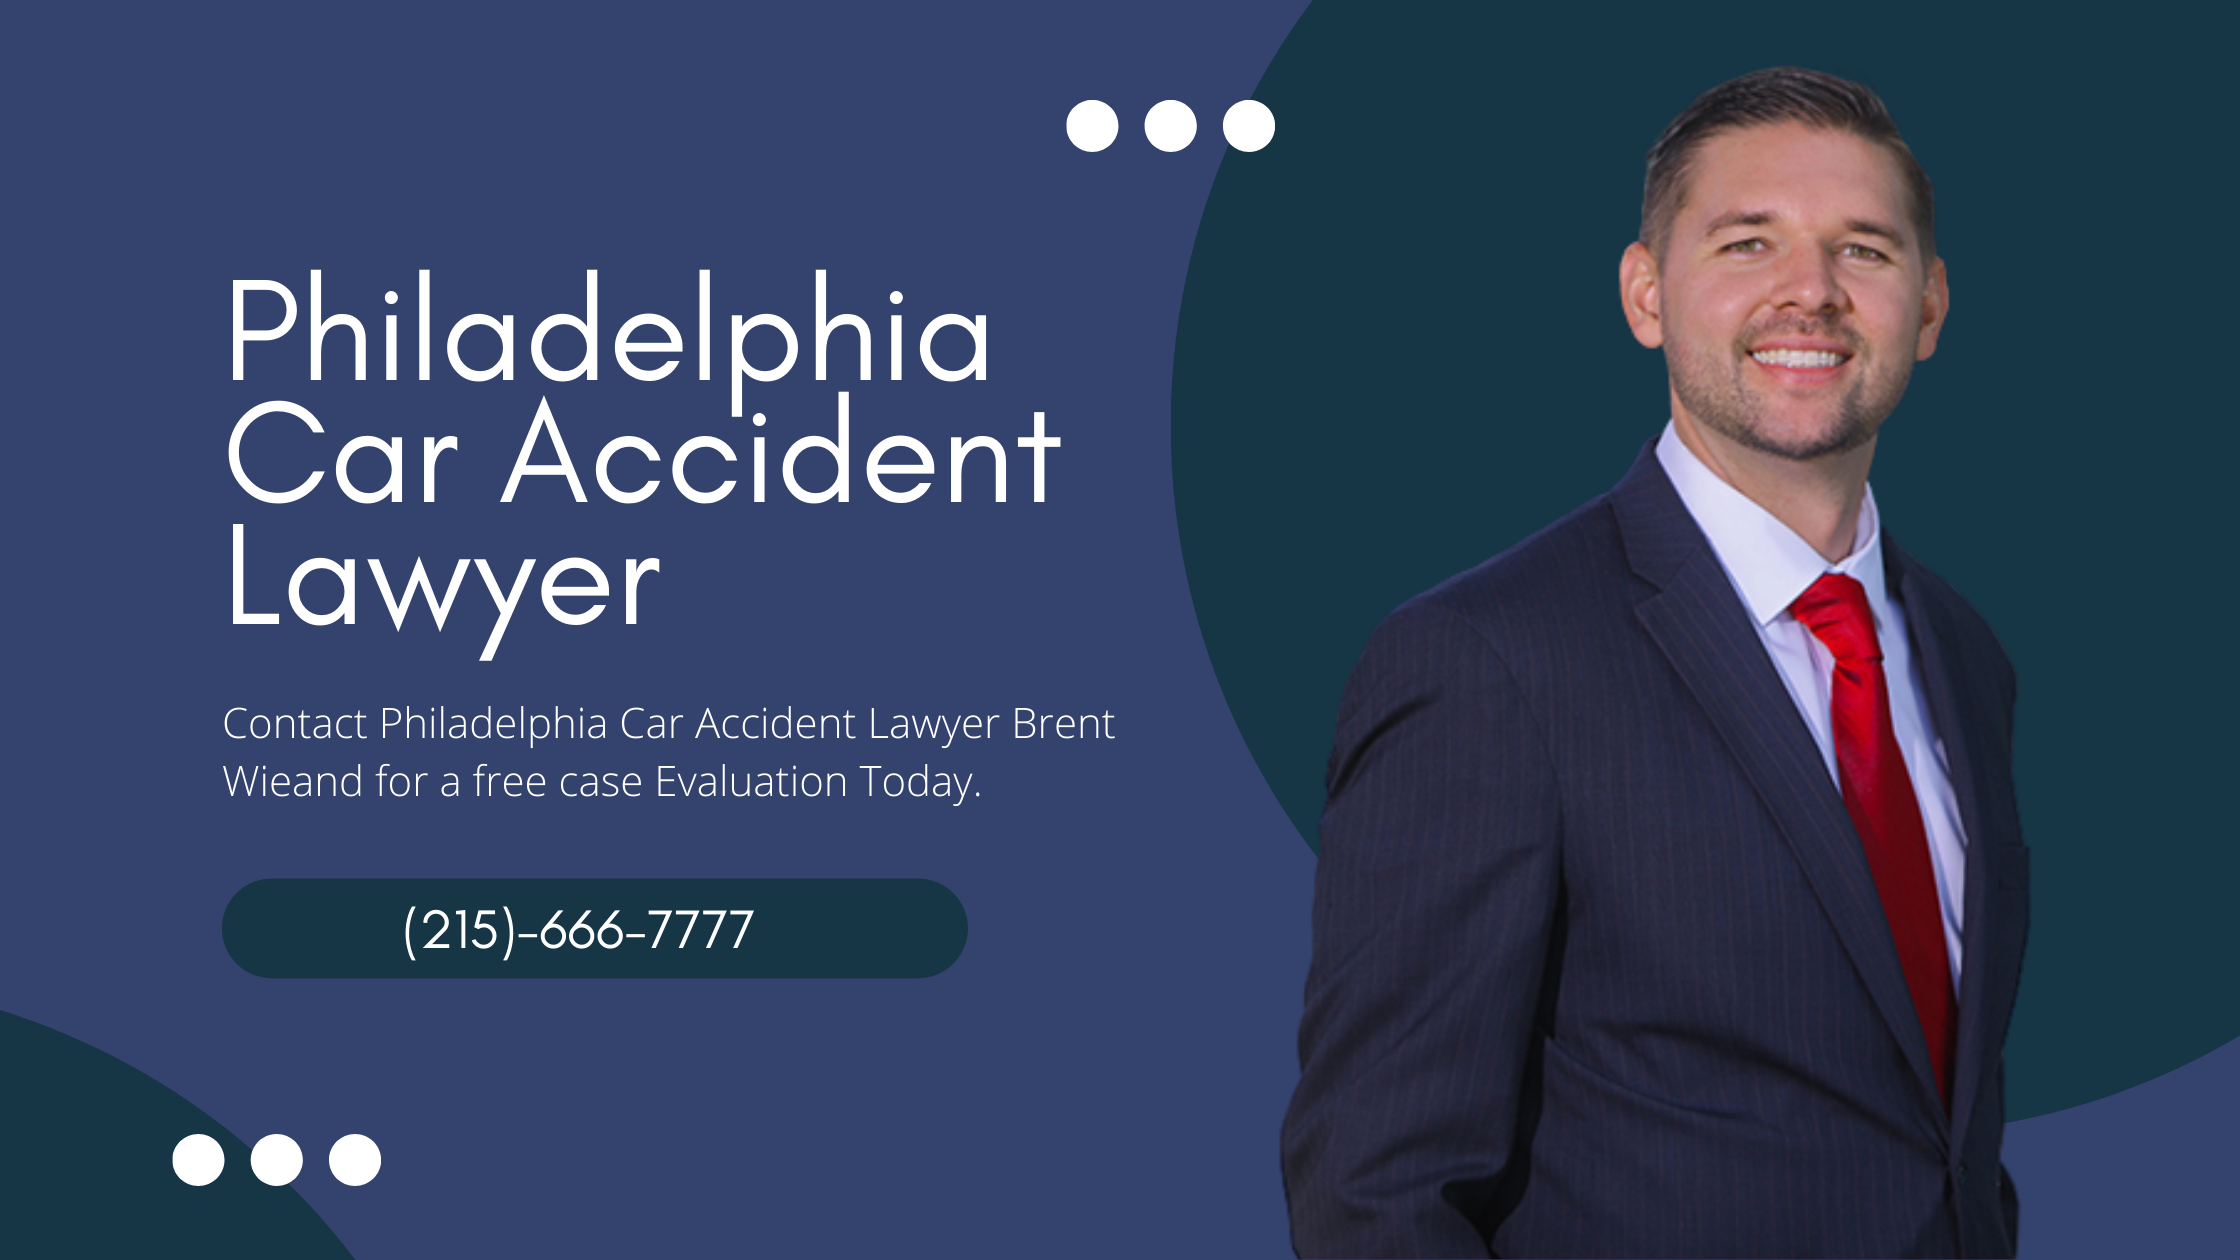 Contact Philadelphia Car Accident Lawyer Brent Wieand